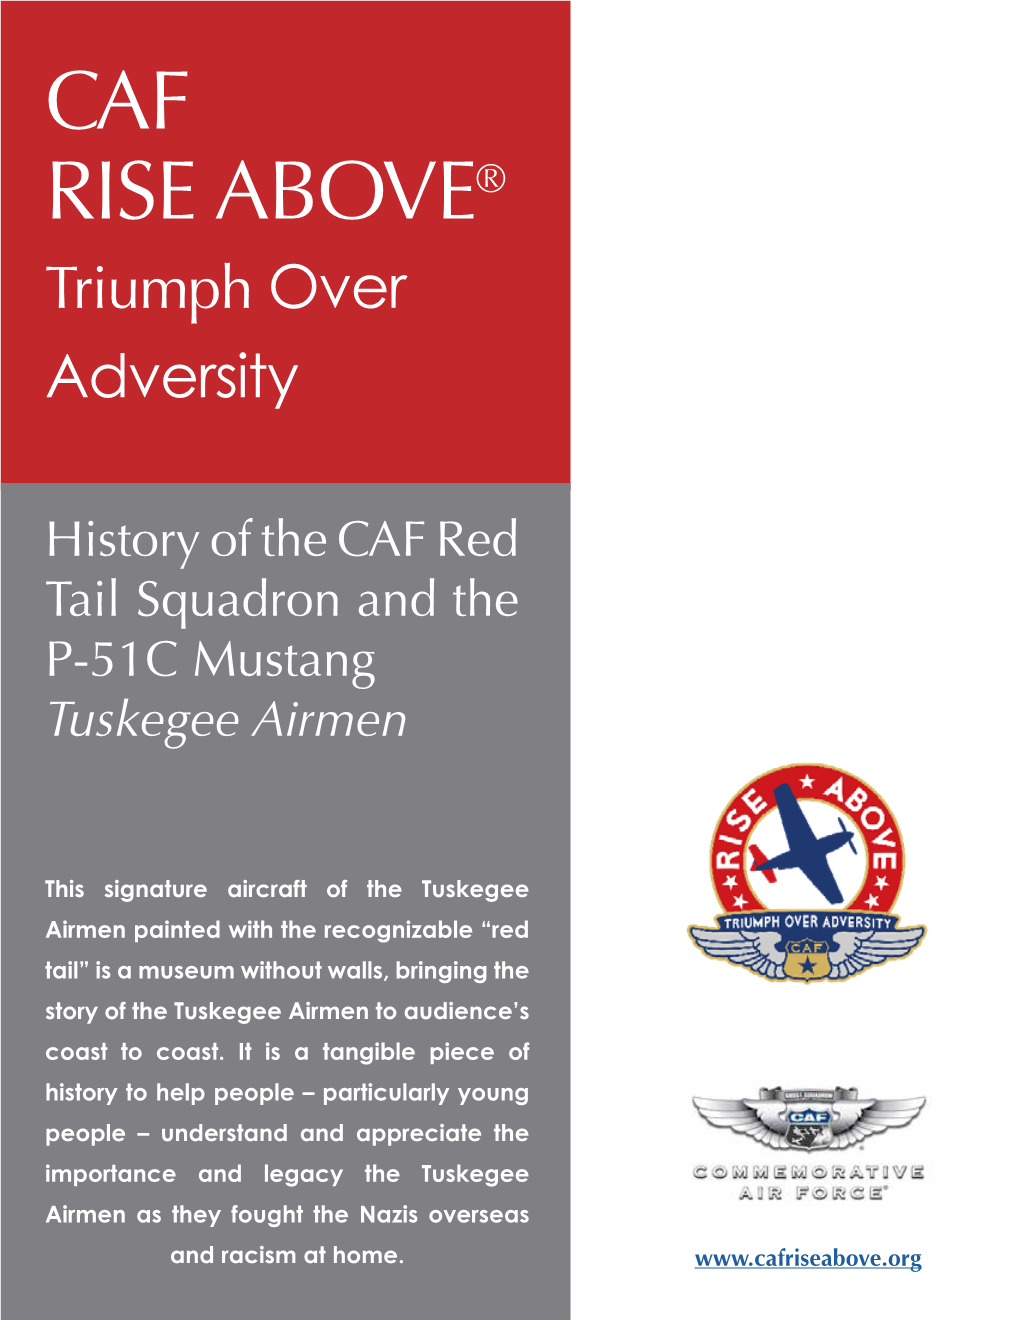 History of the CAF Red Tail Squadron and the P-51C Mustang Tuskegee Airmen